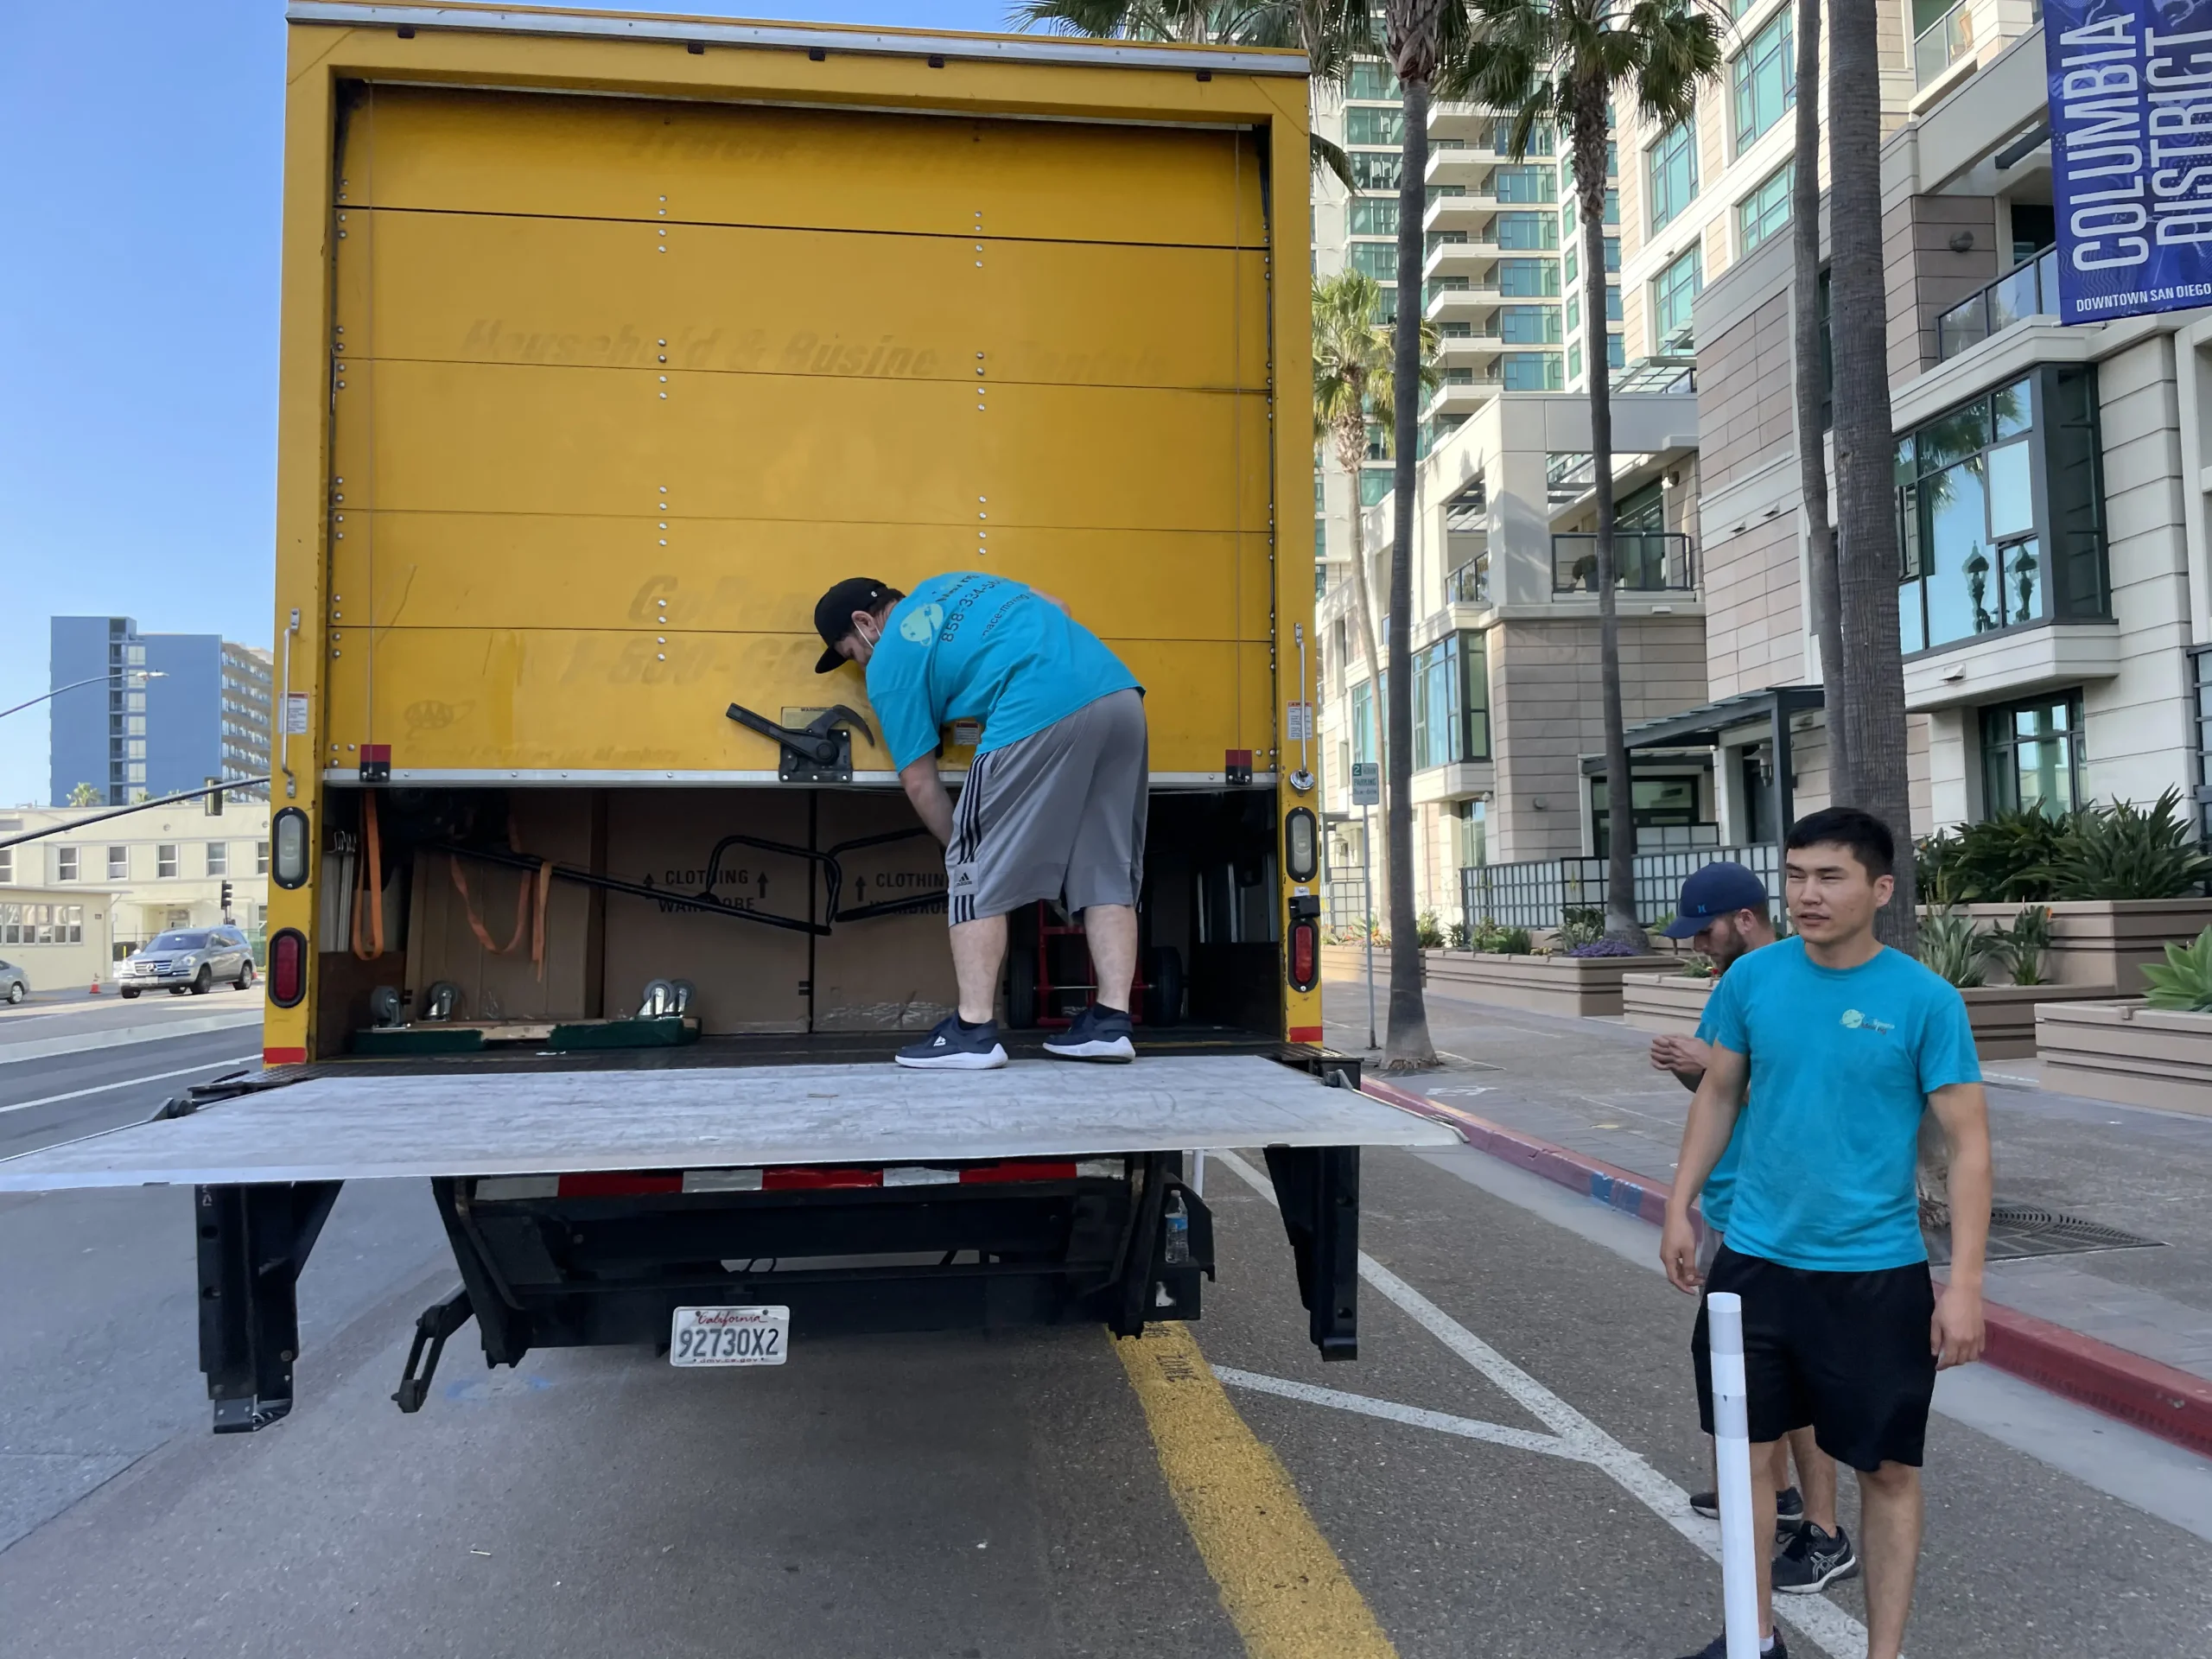 Trustworthy Movers Near Me at Your Service